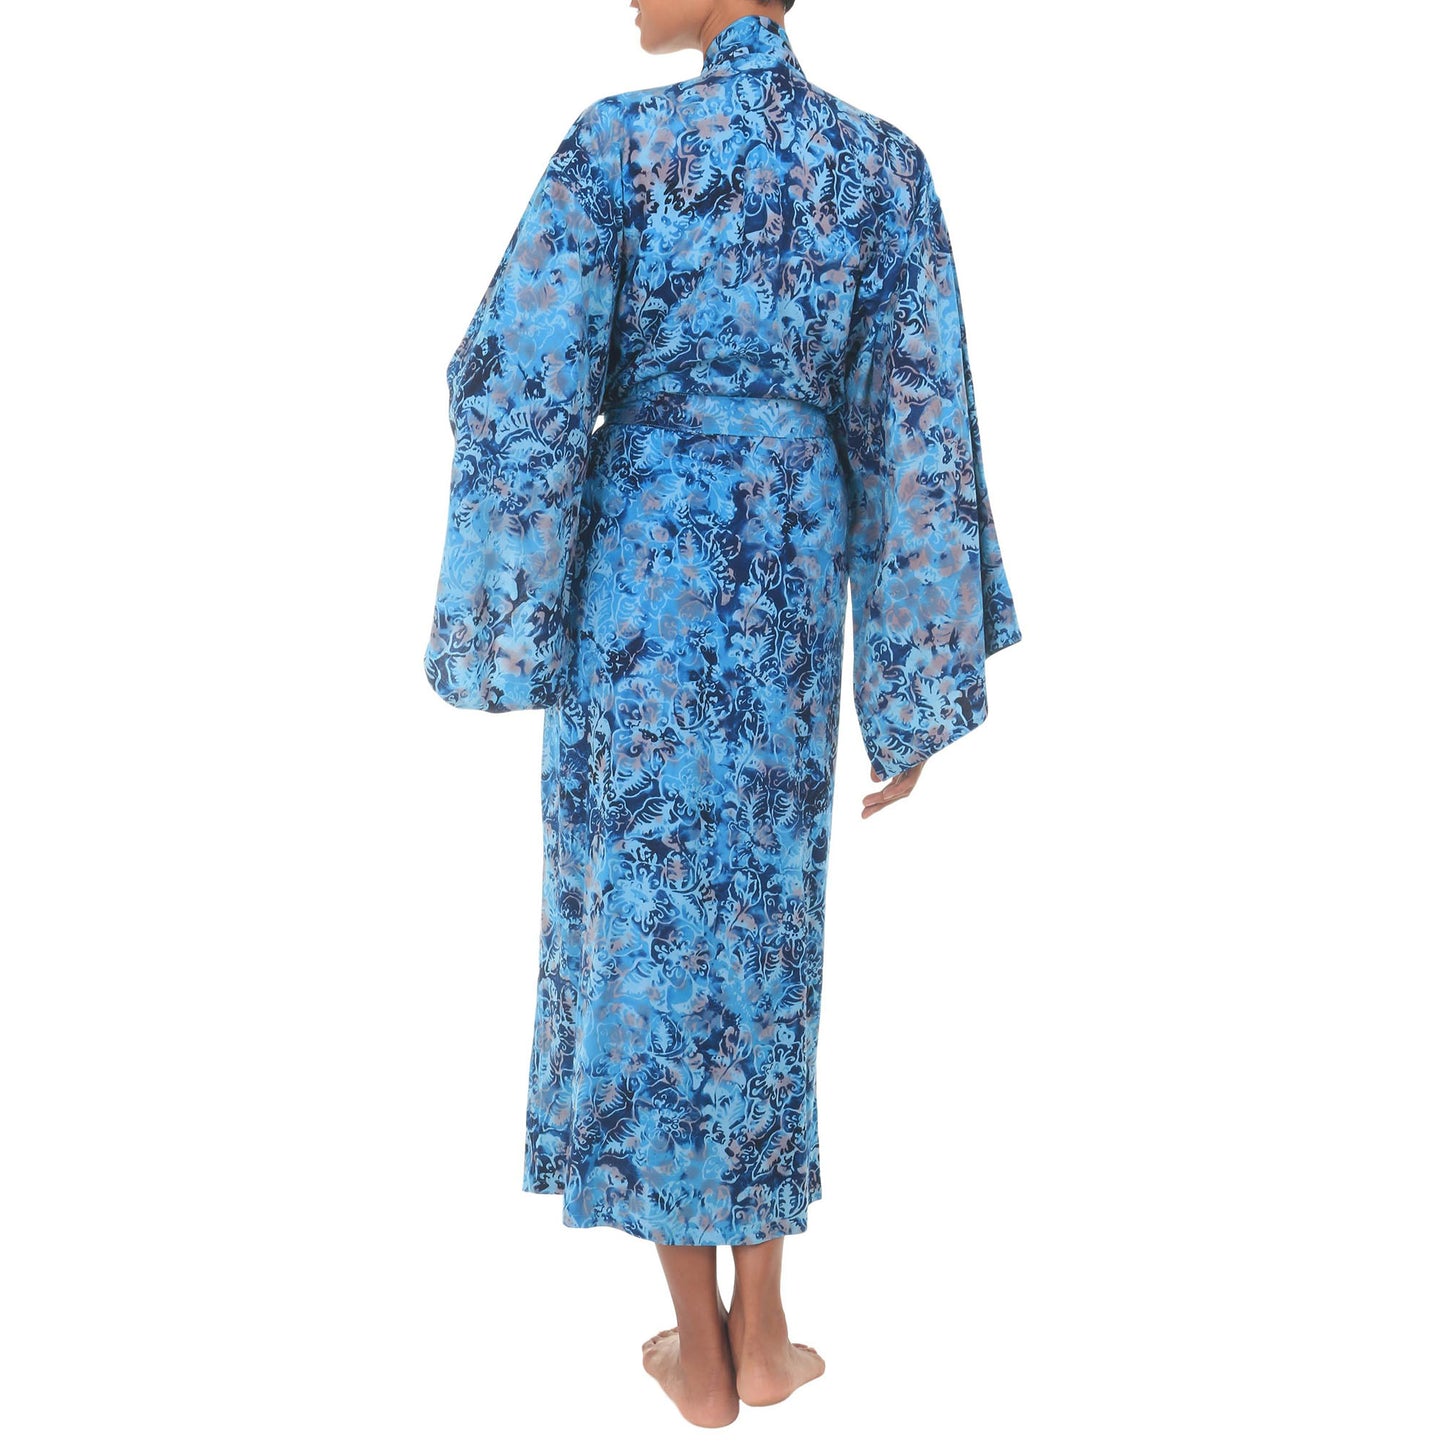 Sapphire Dreams Patterned Robe